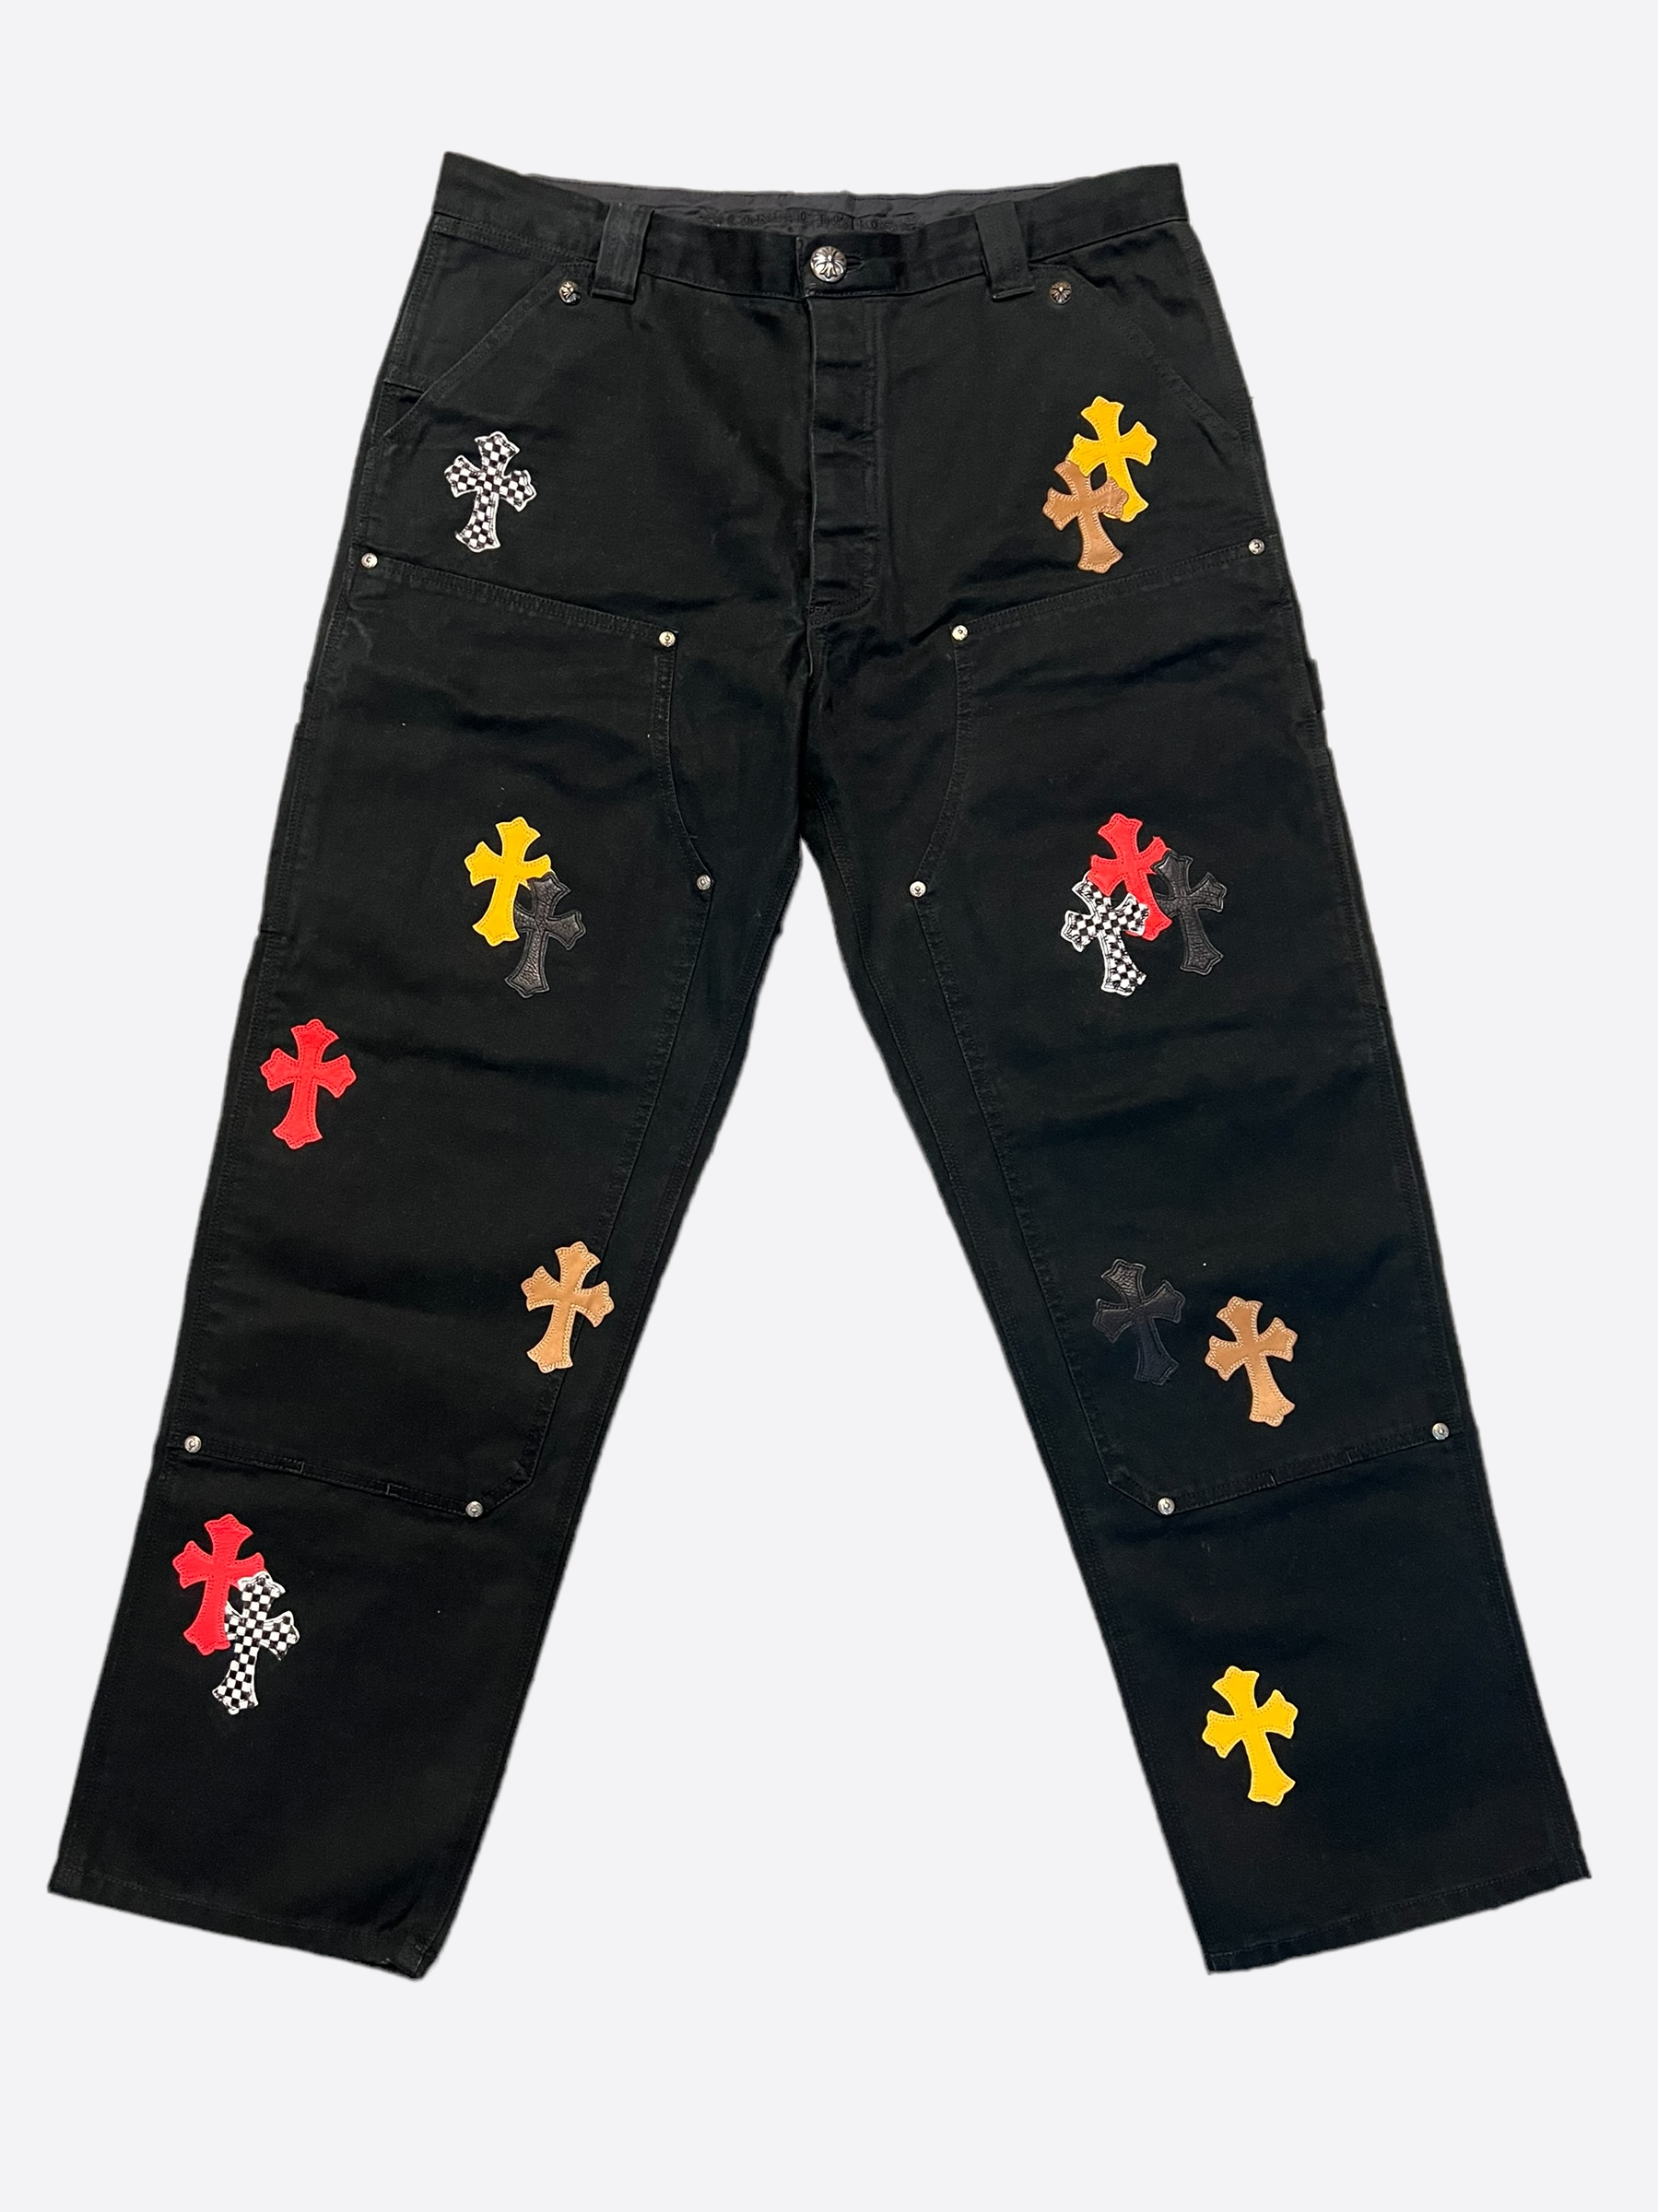 CHROME HEARTS X CDG BLACK DENIM JEANS PINK PATCHES